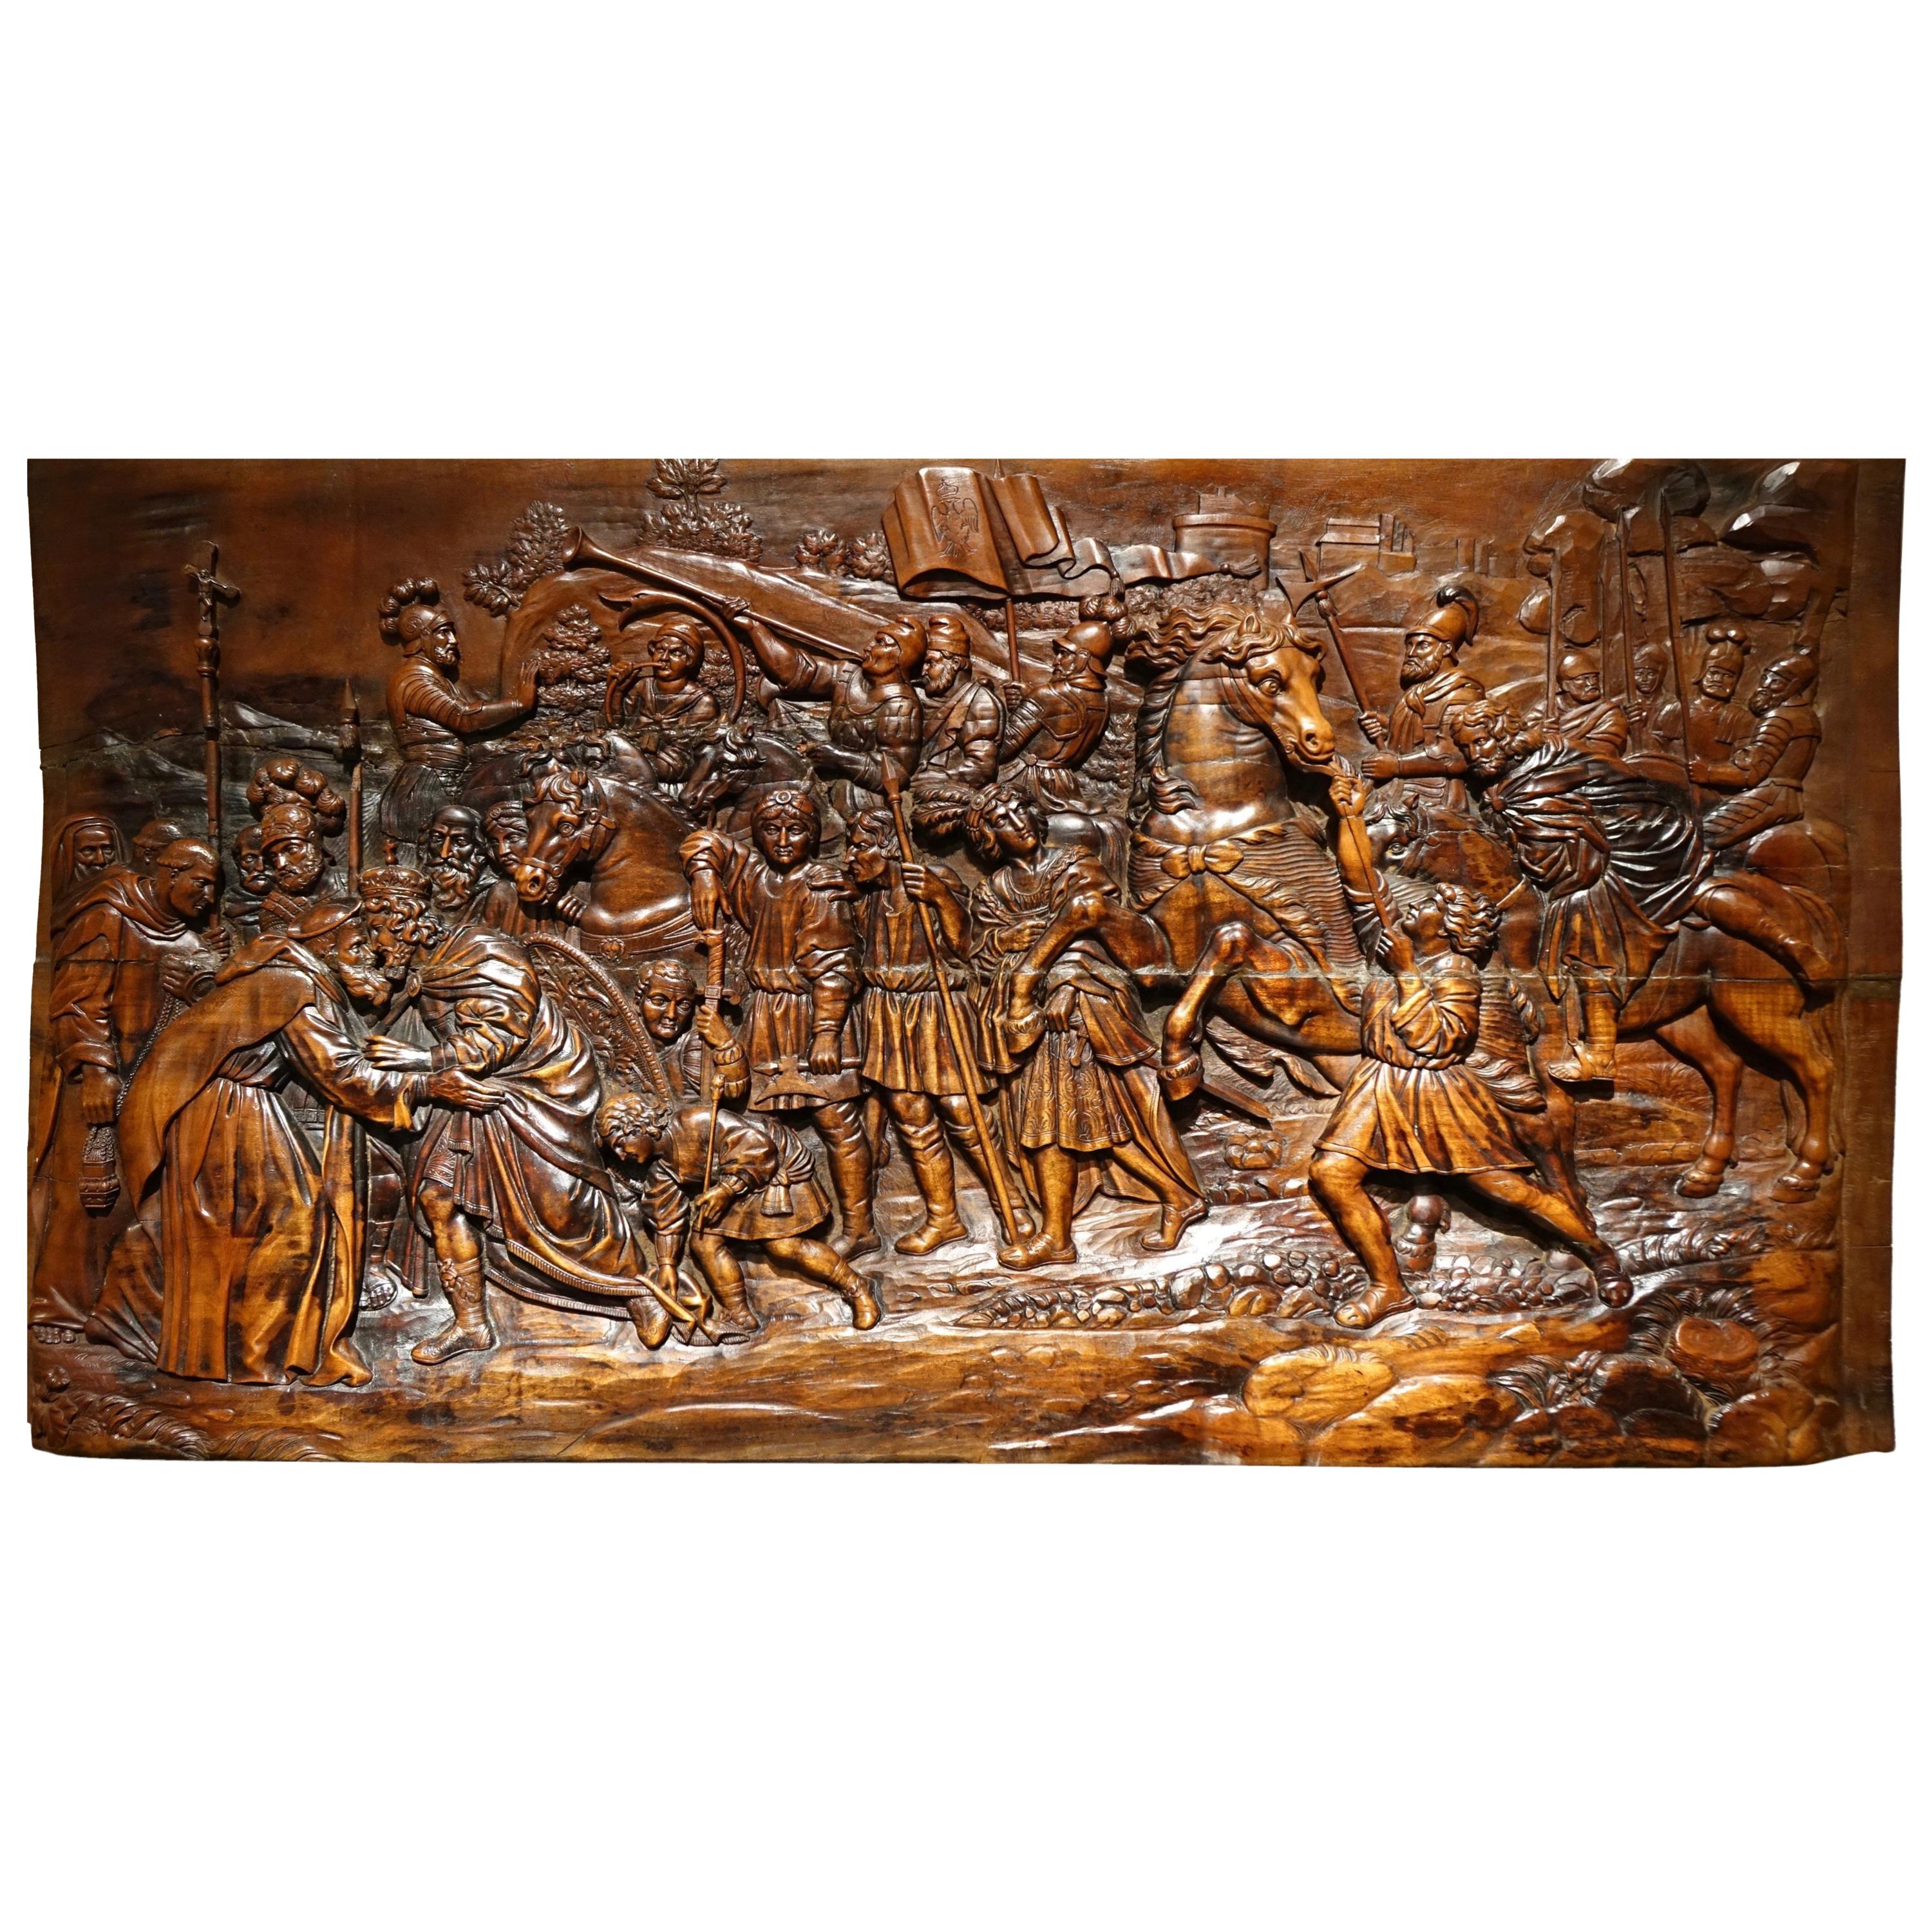 17th Century Wood Panel Sculpture Carved in Low Relief, Italy or France